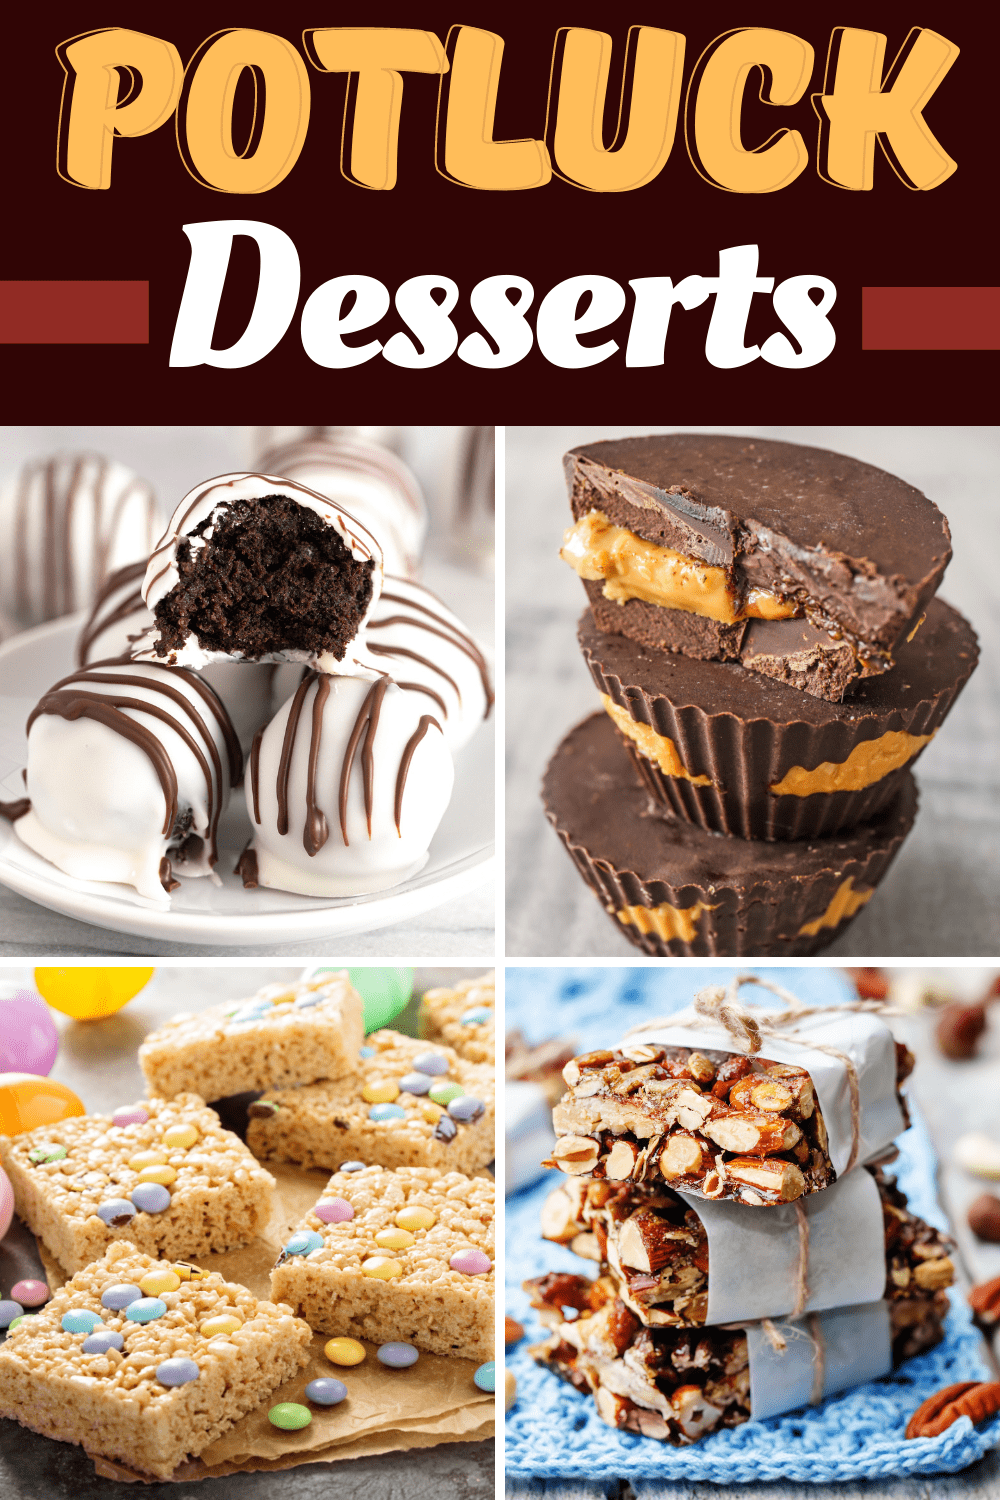 28-best-potluck-desserts-to-feed-a-crowd-insanely-good